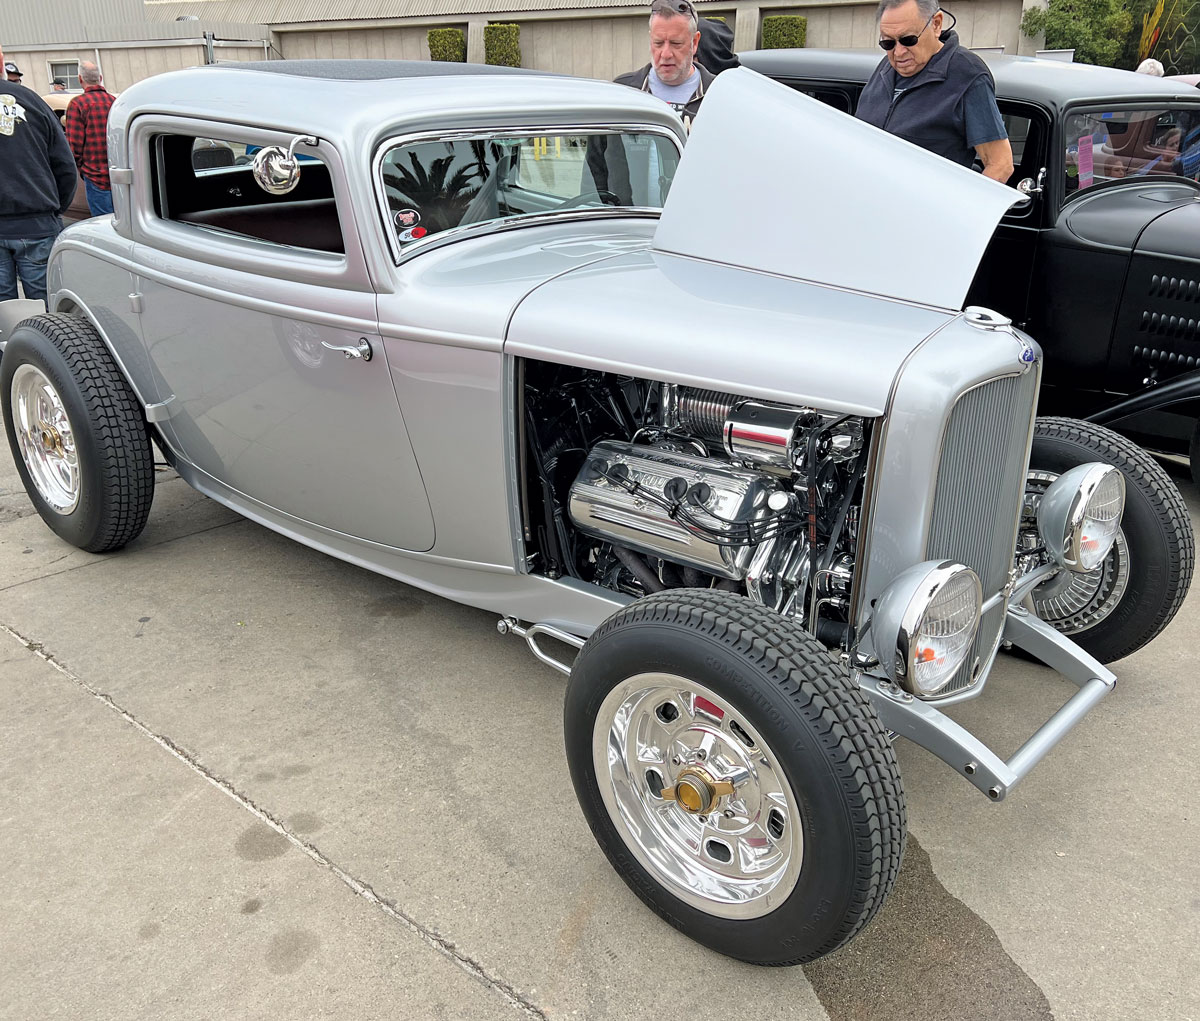 The Sunday Modern Rodding Editor’s Pick belongs to Bruce Fortie for his ’32 Ford highboy three-window